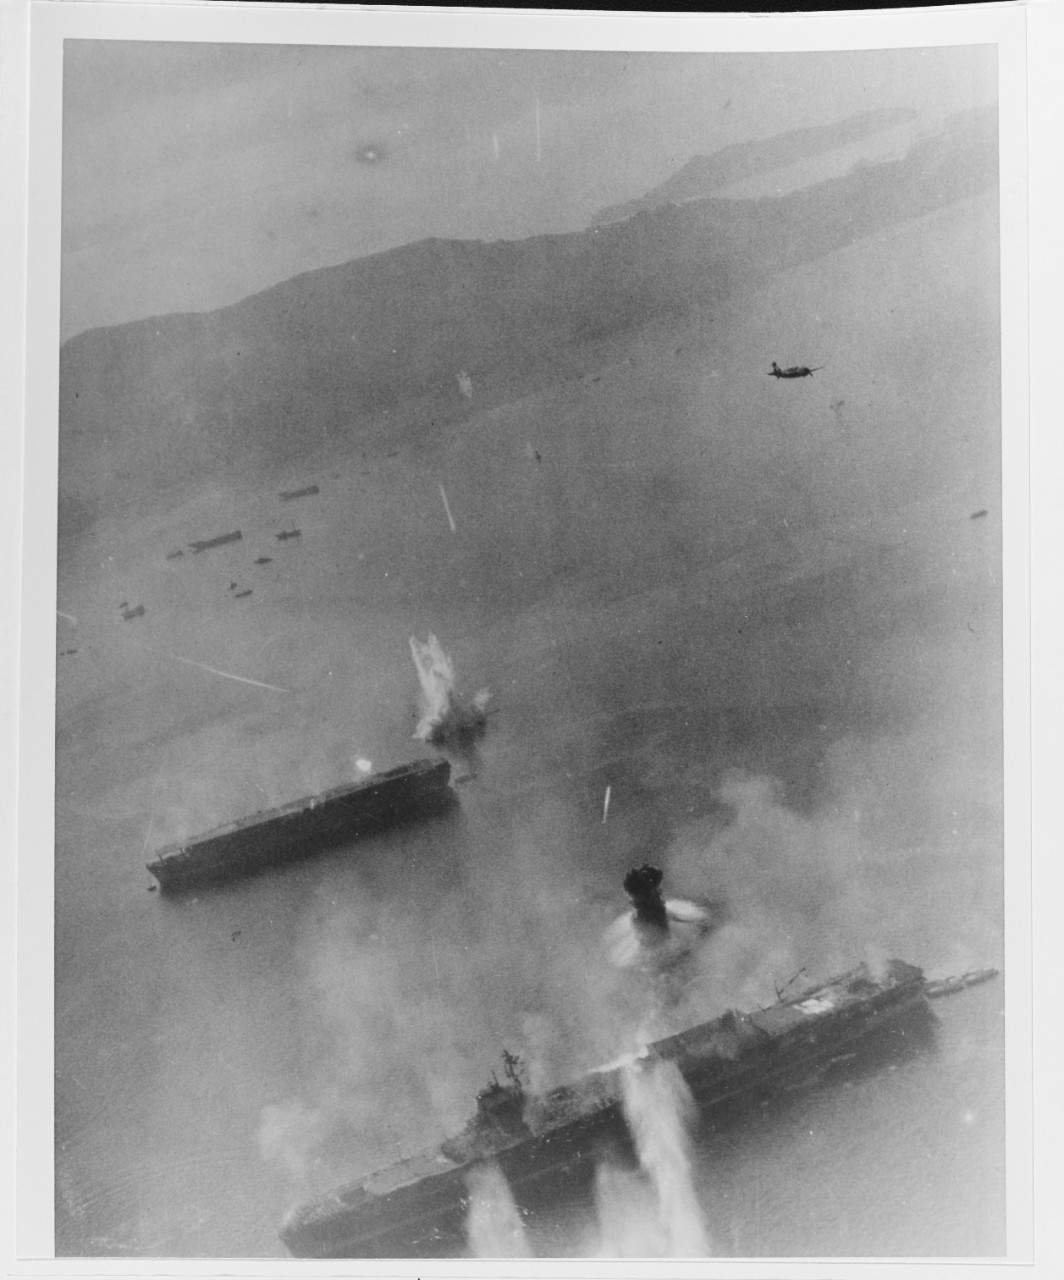 Photo #: NH 95778 Carrier Raids on Japan, March 1945